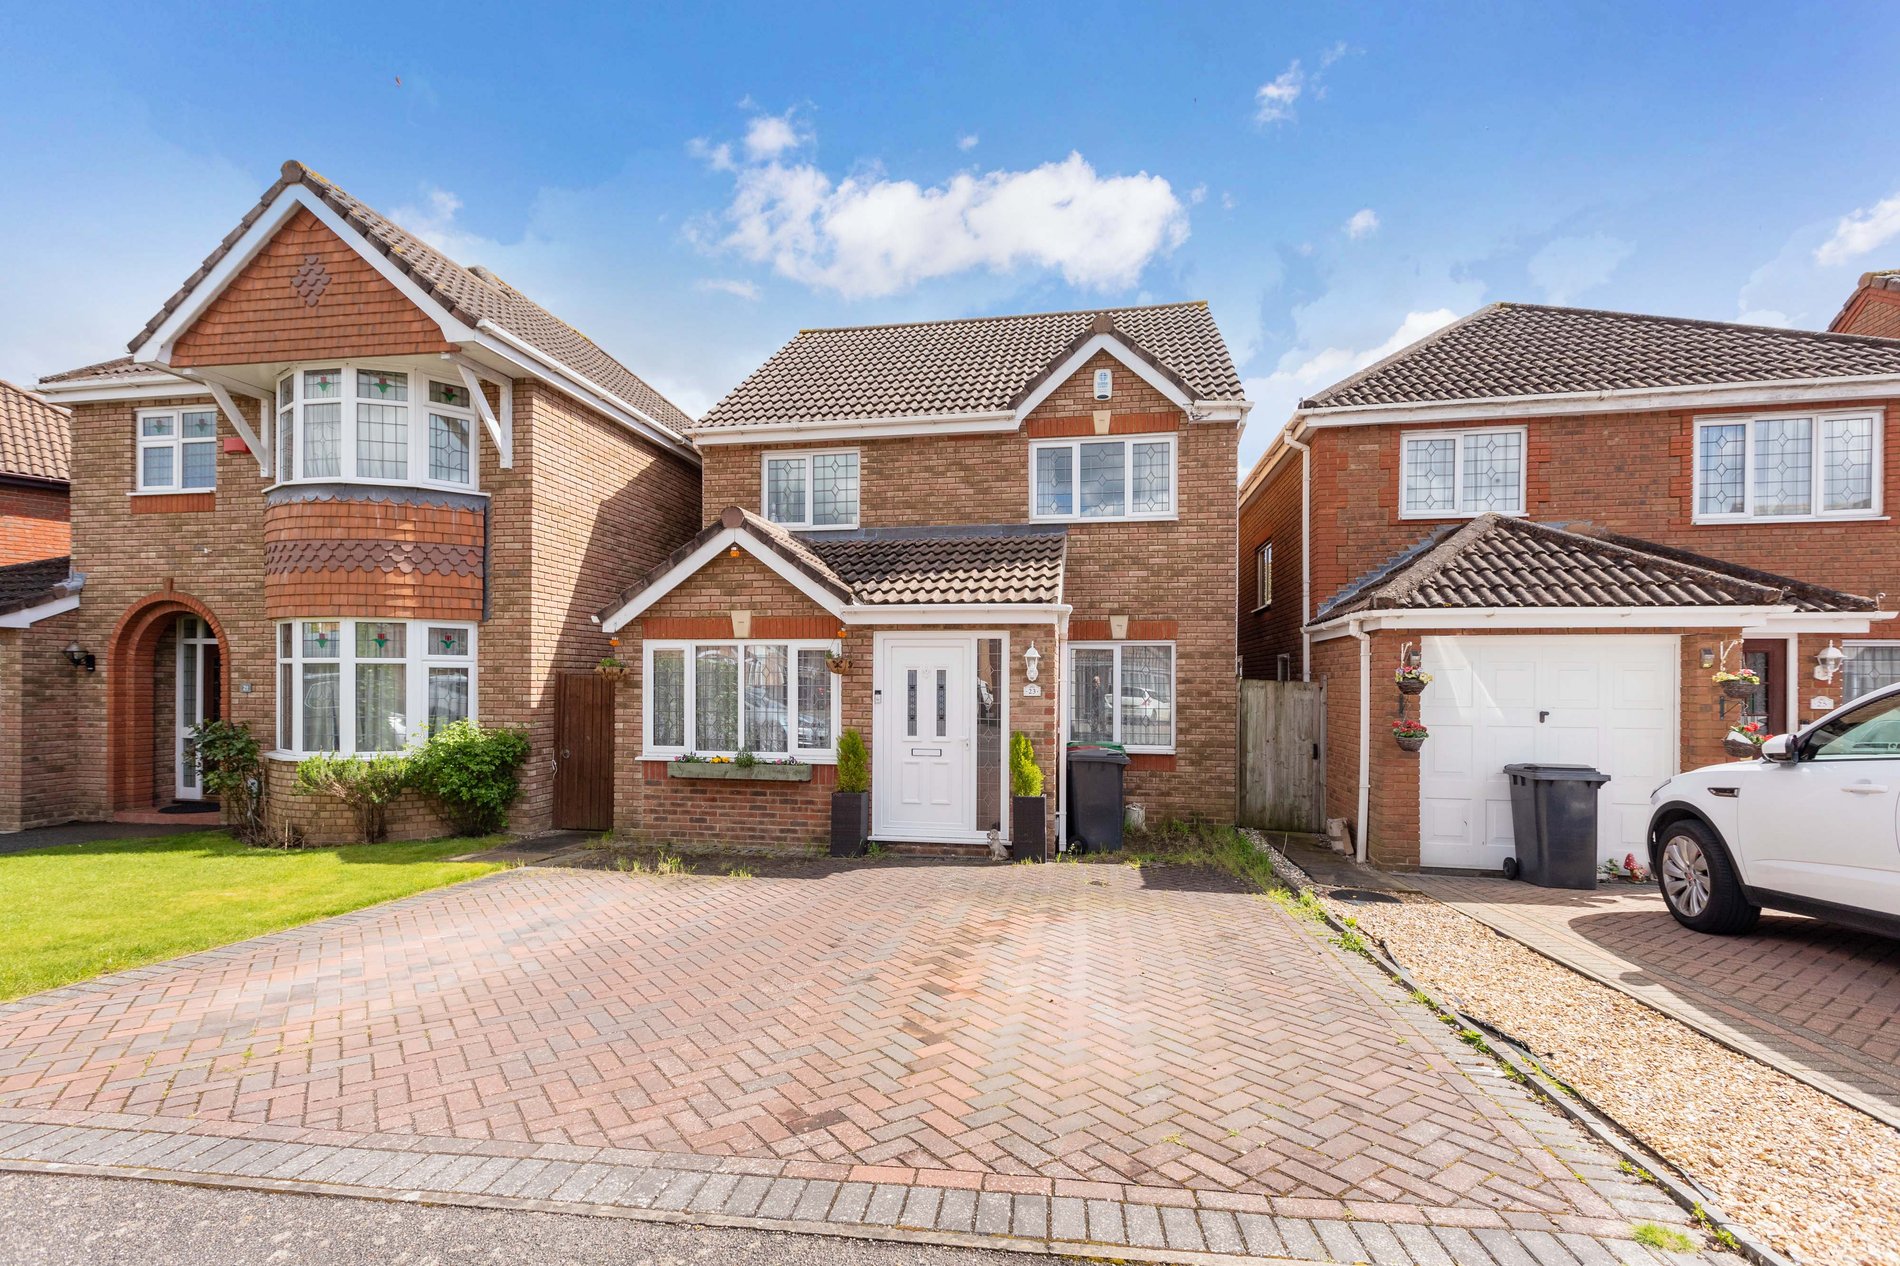 4 bed detached house for sale in Deverills Way, Langley - Property Image 1